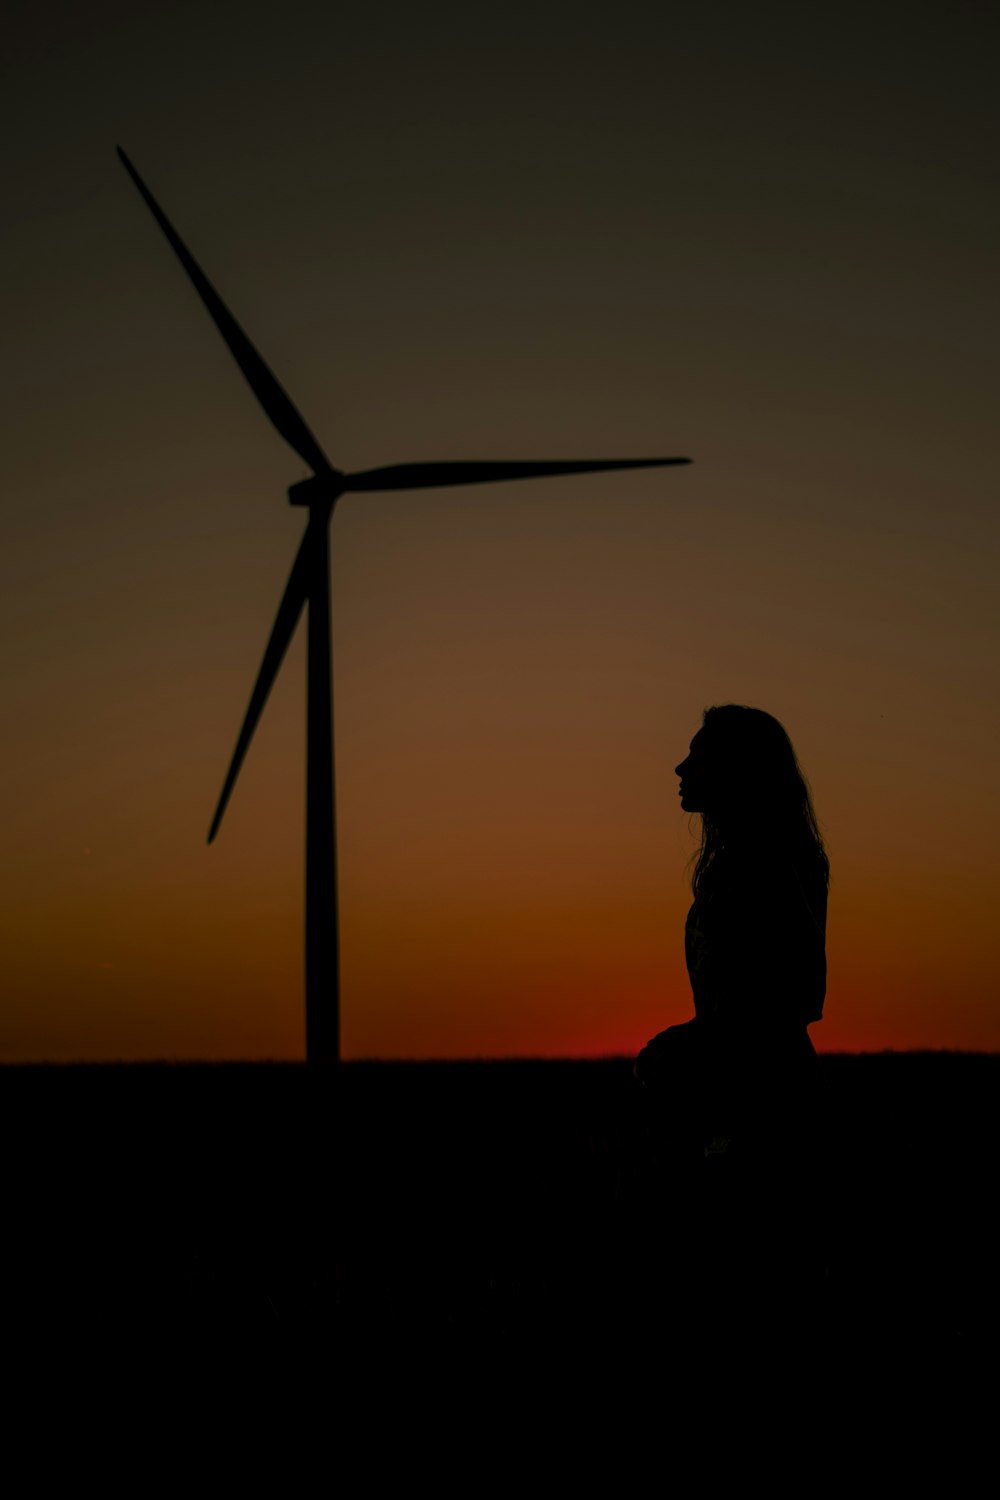 silhouette of person standing near windmill during sunset